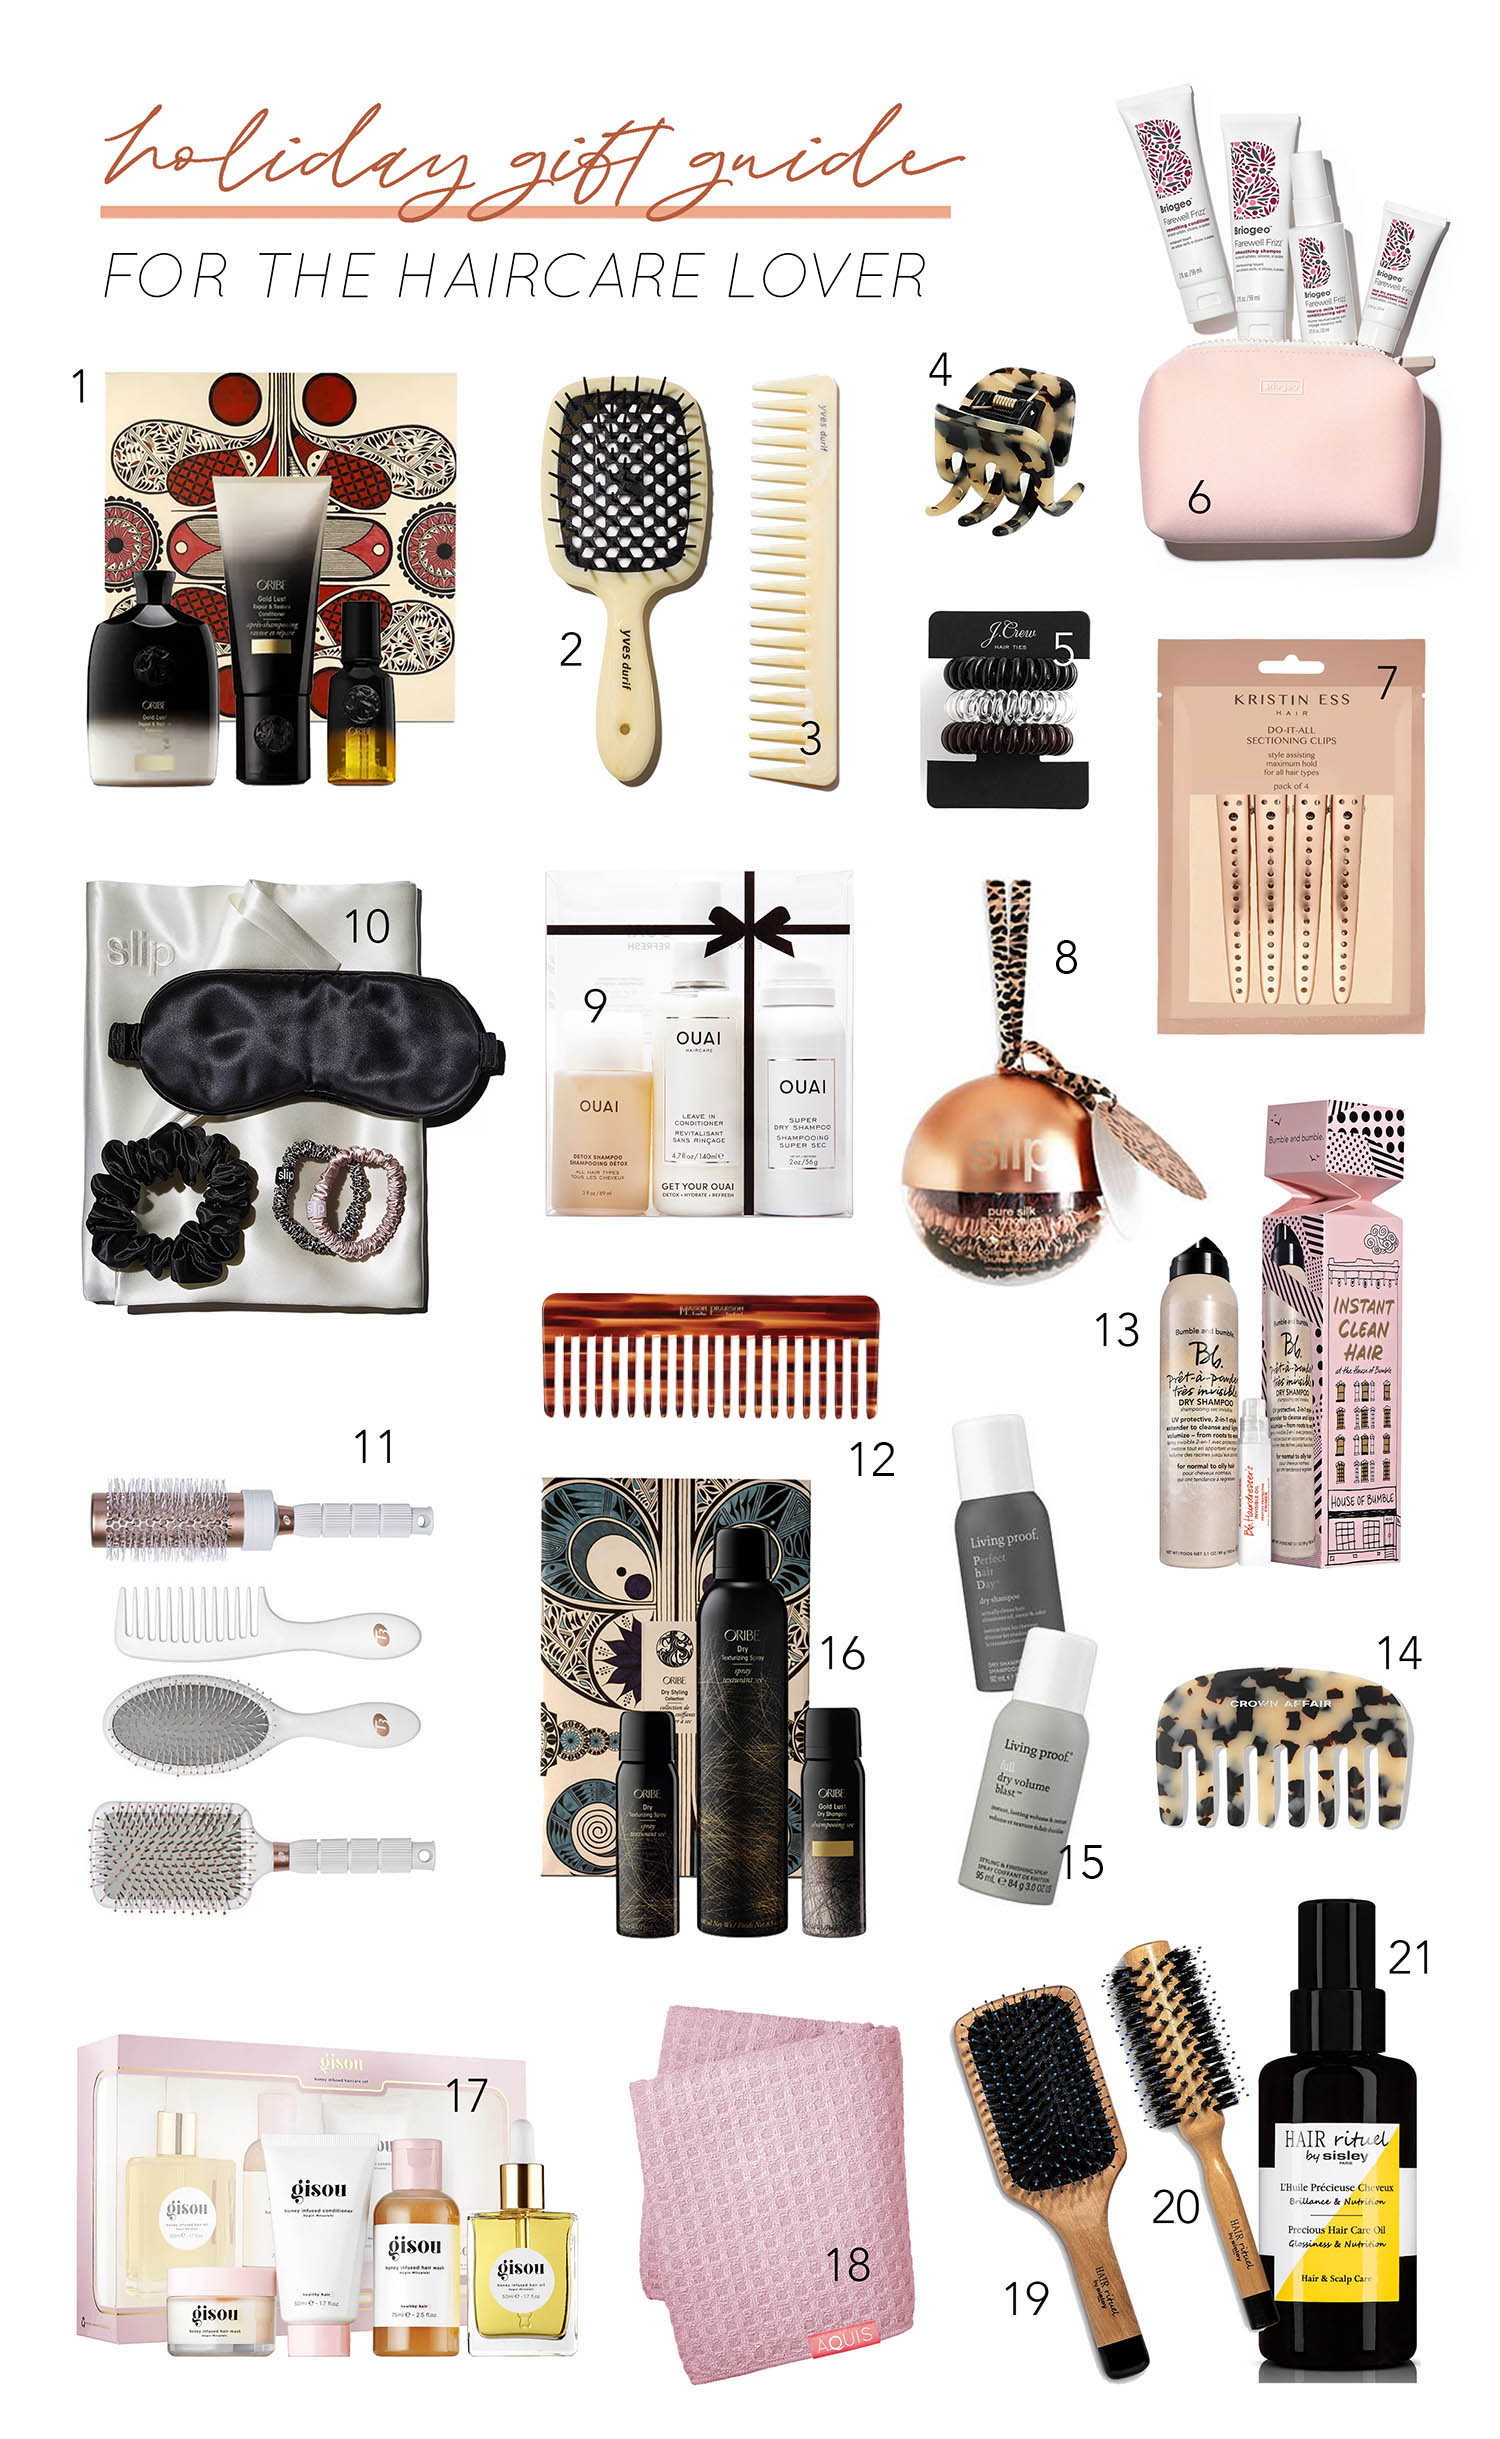 Holiday Gift Ideas for the Home - The Beauty Look Book